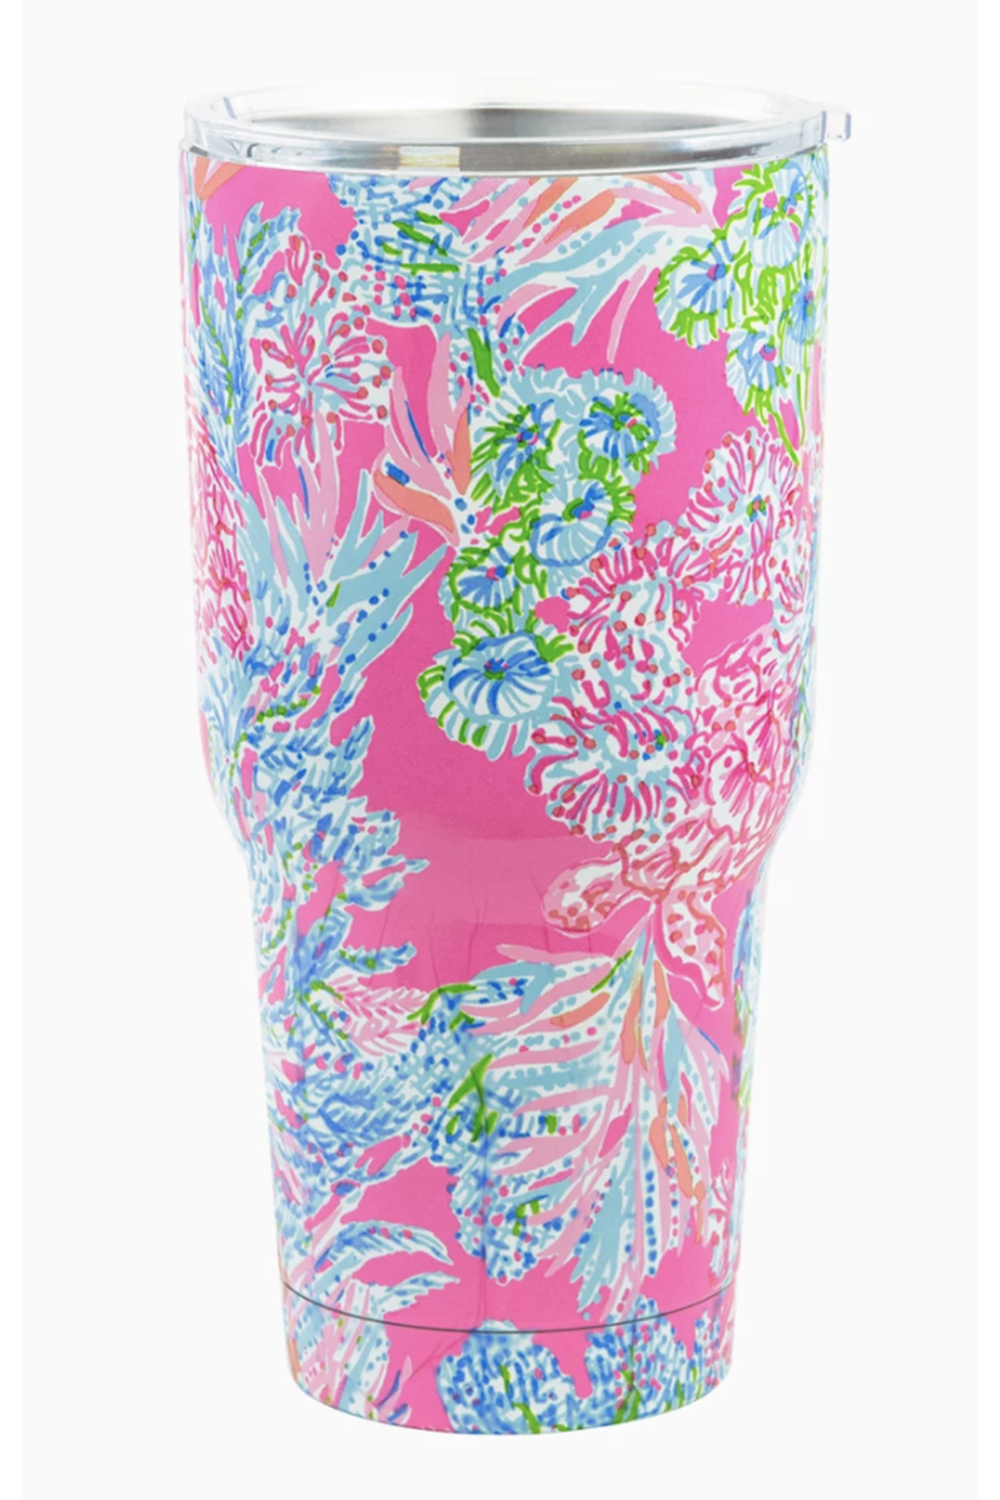 Lilly Pulitzer Modern Insulated Tumbler - Seaing Things